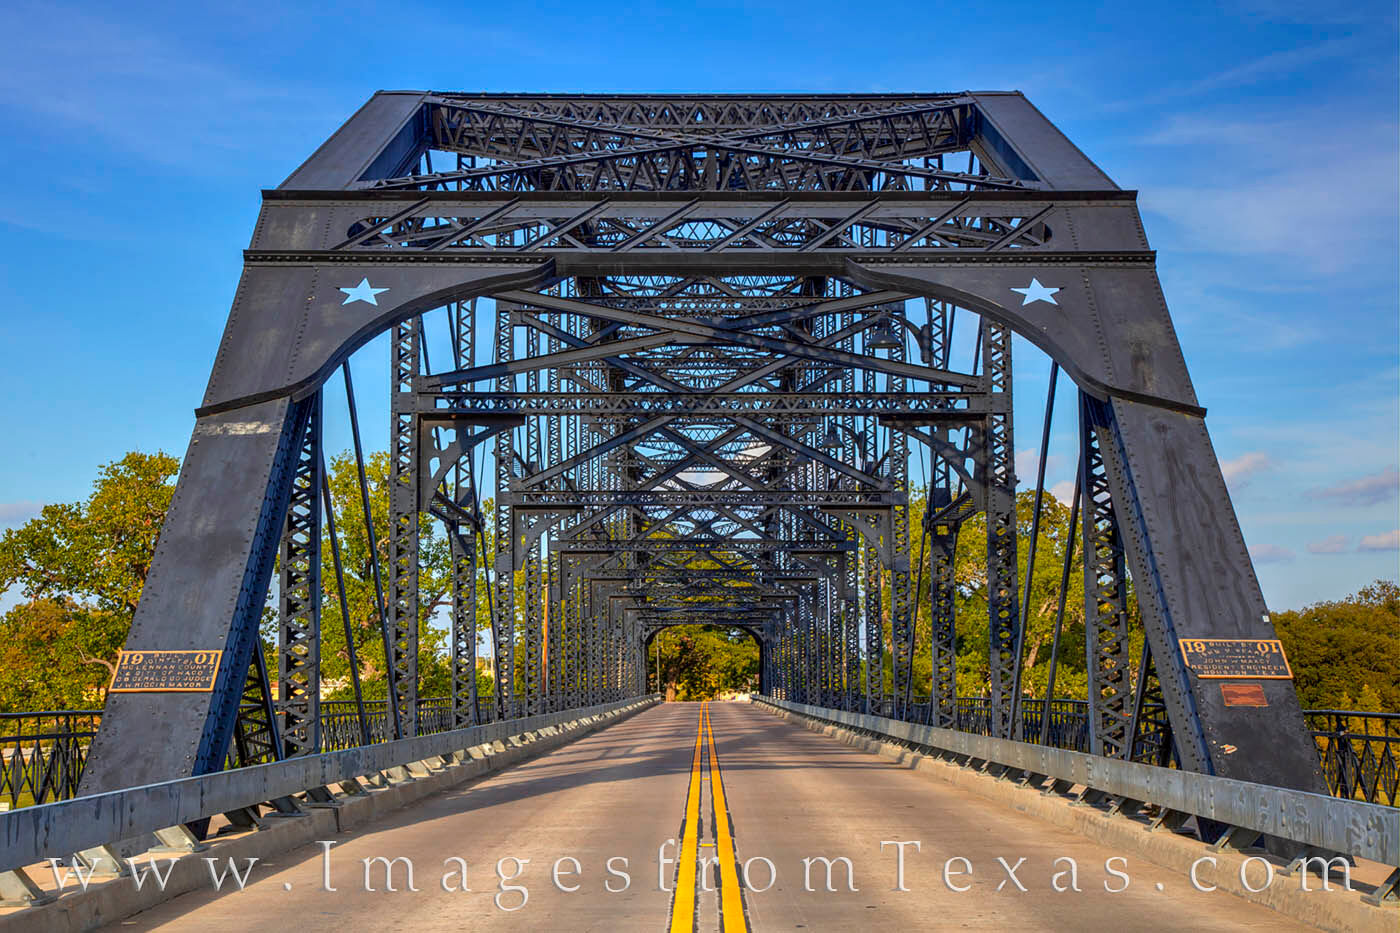 Built in 1901 to span the Brazos River just north of downtown Waco, the Washington Avenue Bridge is a 450' Pennsylvania truss...